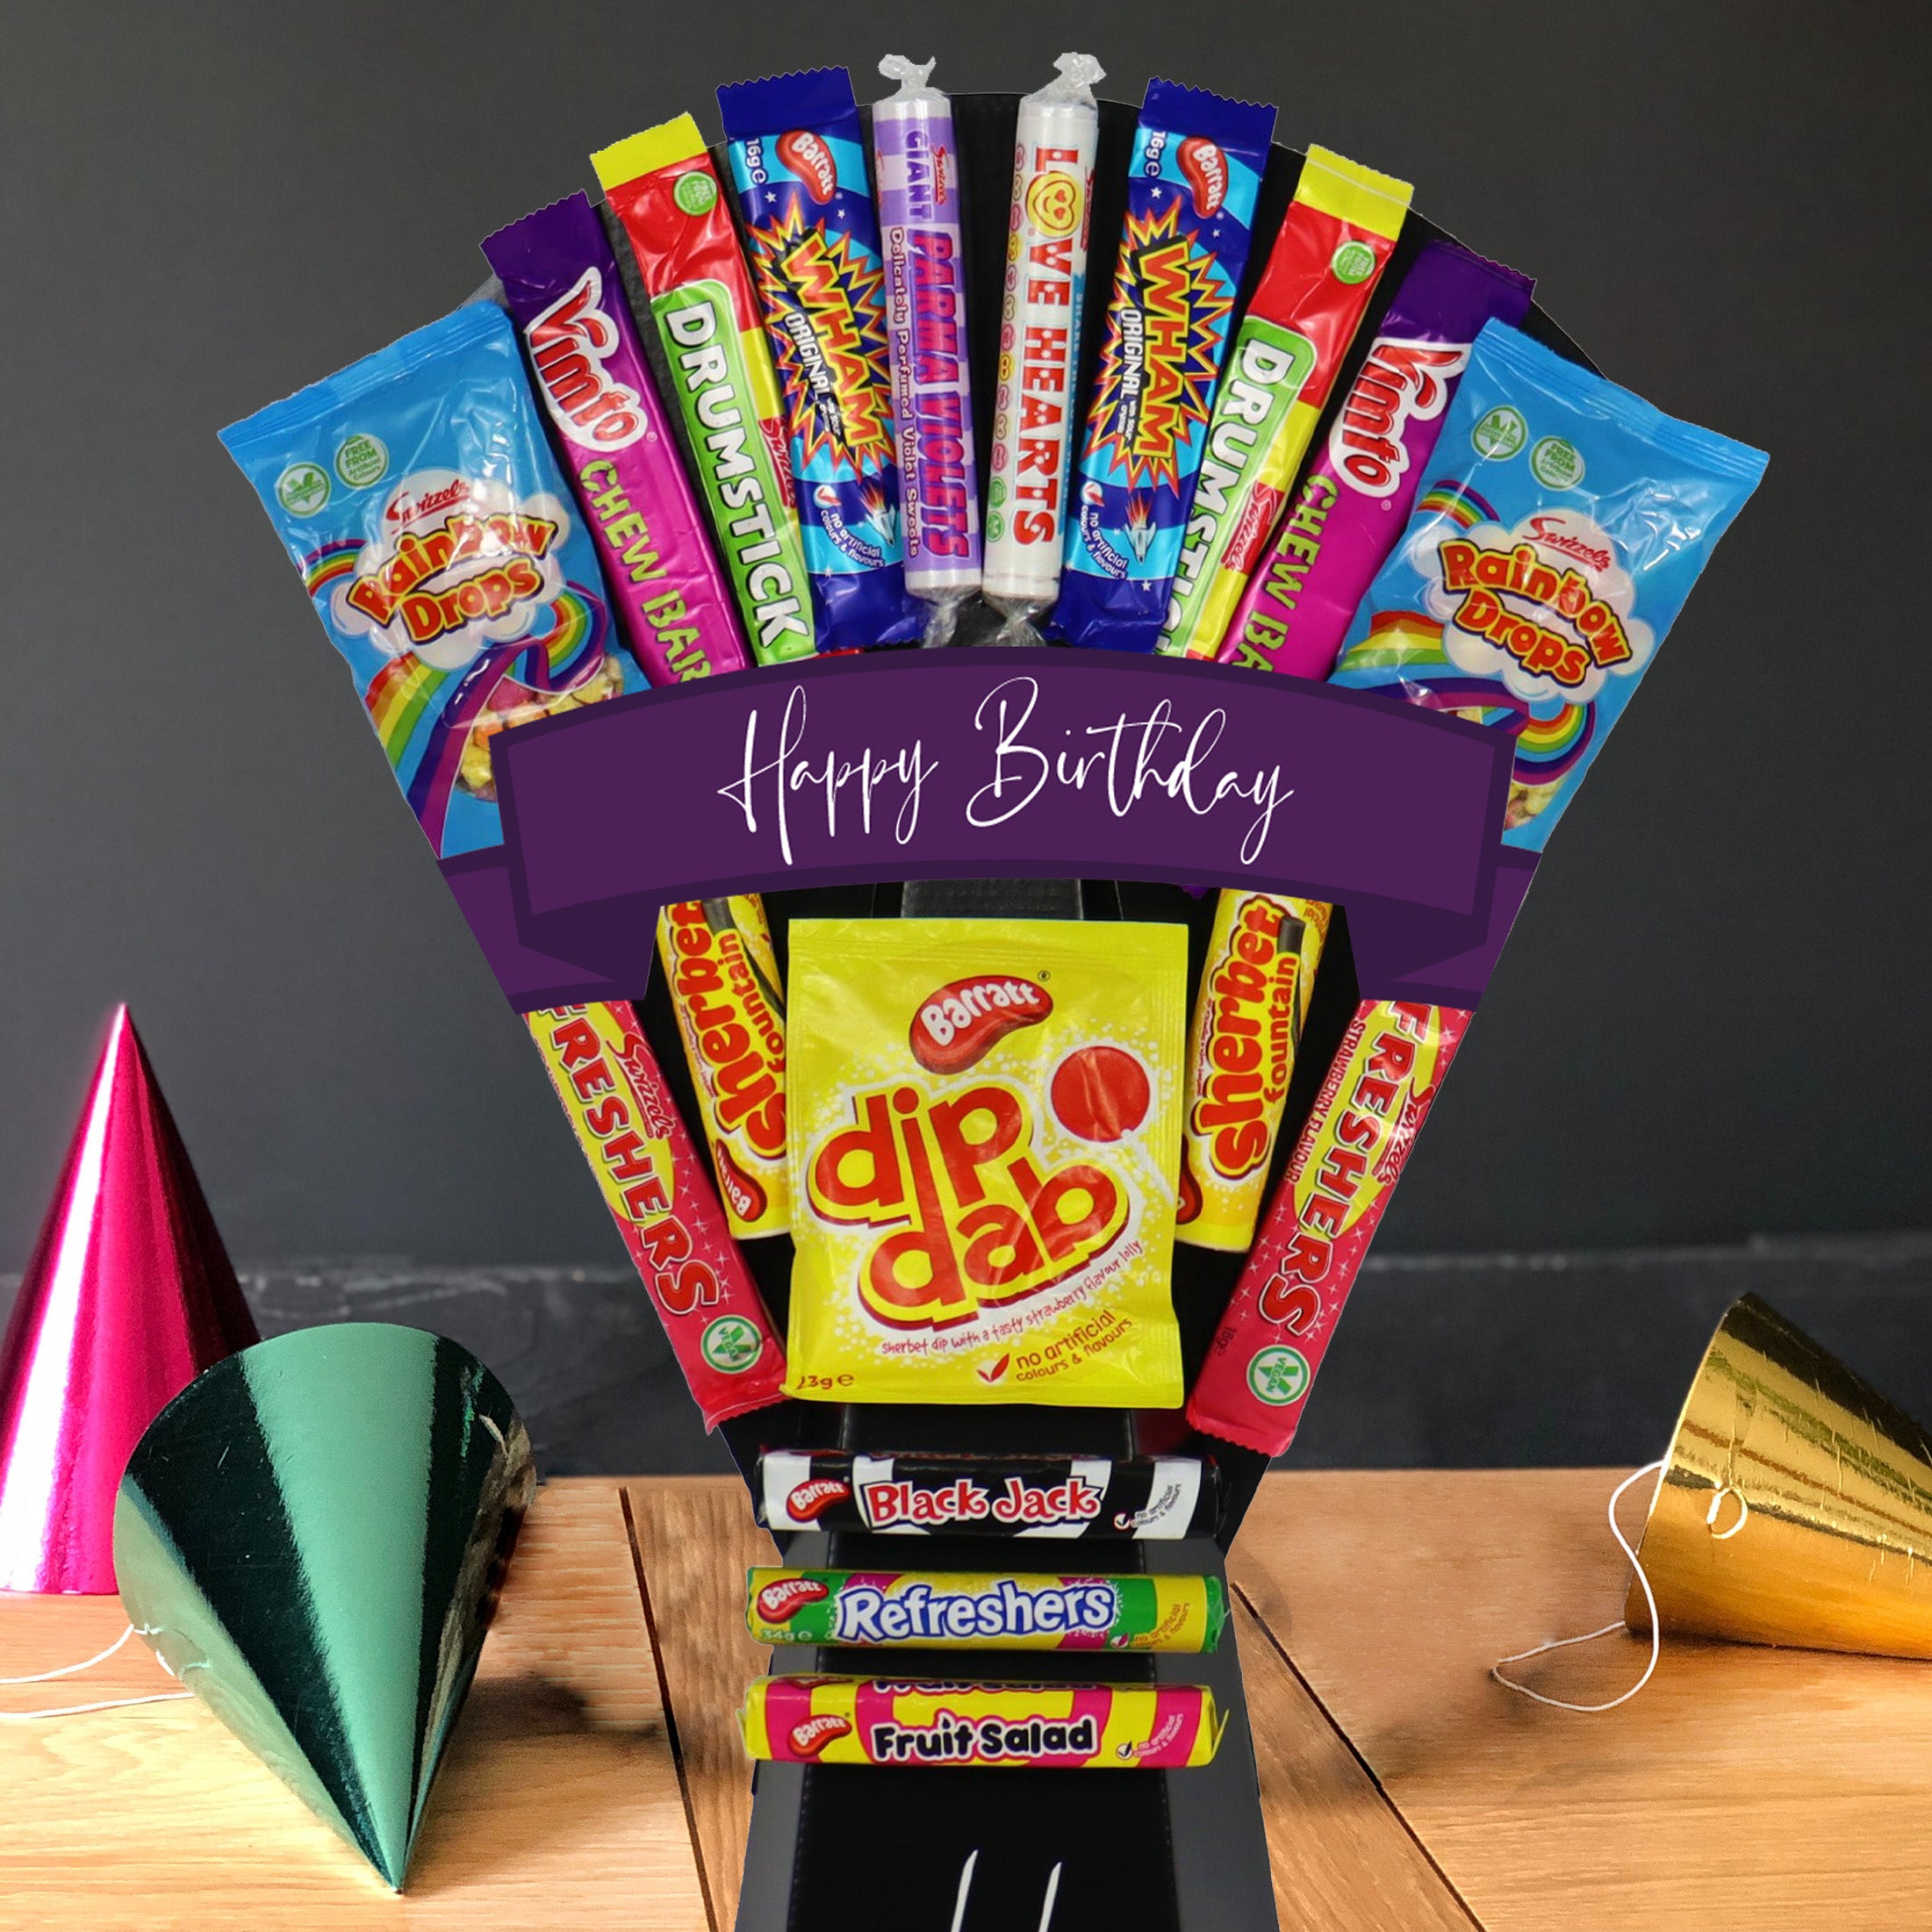 Retro Sweets Happy Birthday Bouquet with Dip Dabs, Refreshers, Drumsticks - Perfect Birthday Gift